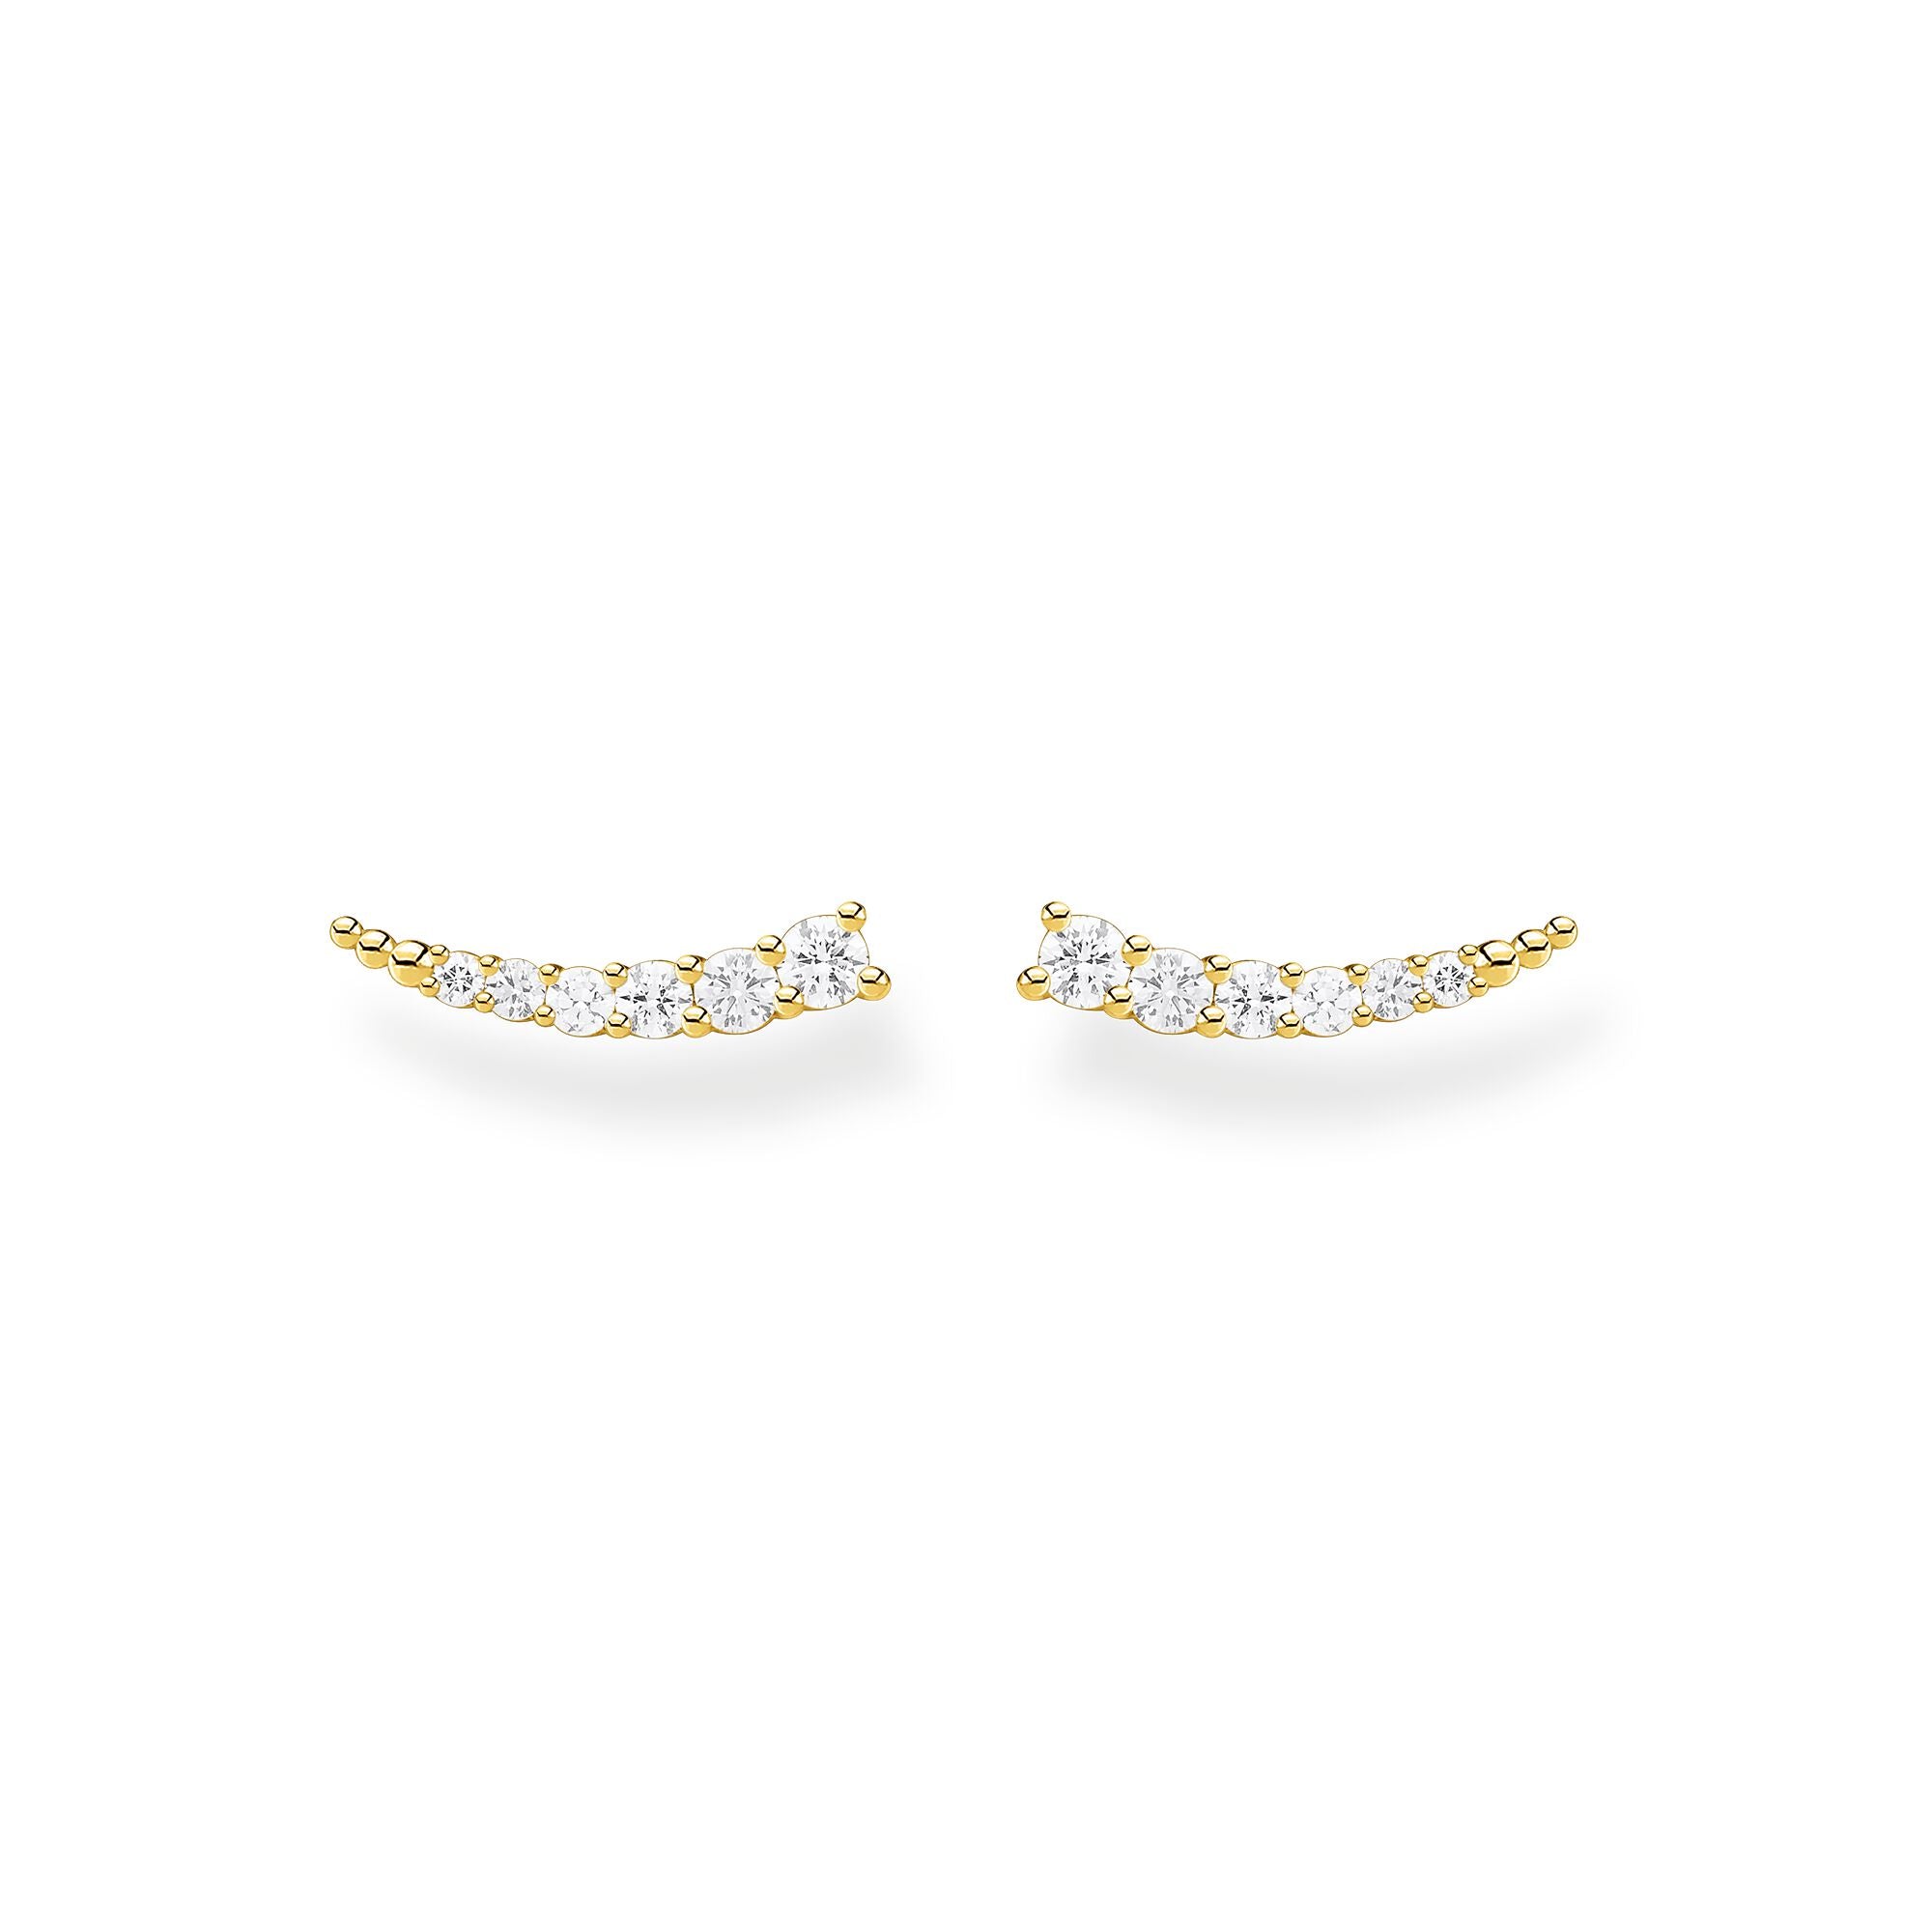 Thomas Sabo, Sterling Silver, Yellow Gold Plated, Cubic Zirconia, Multi Stone, Curve, Earring Climbers, Ottawa